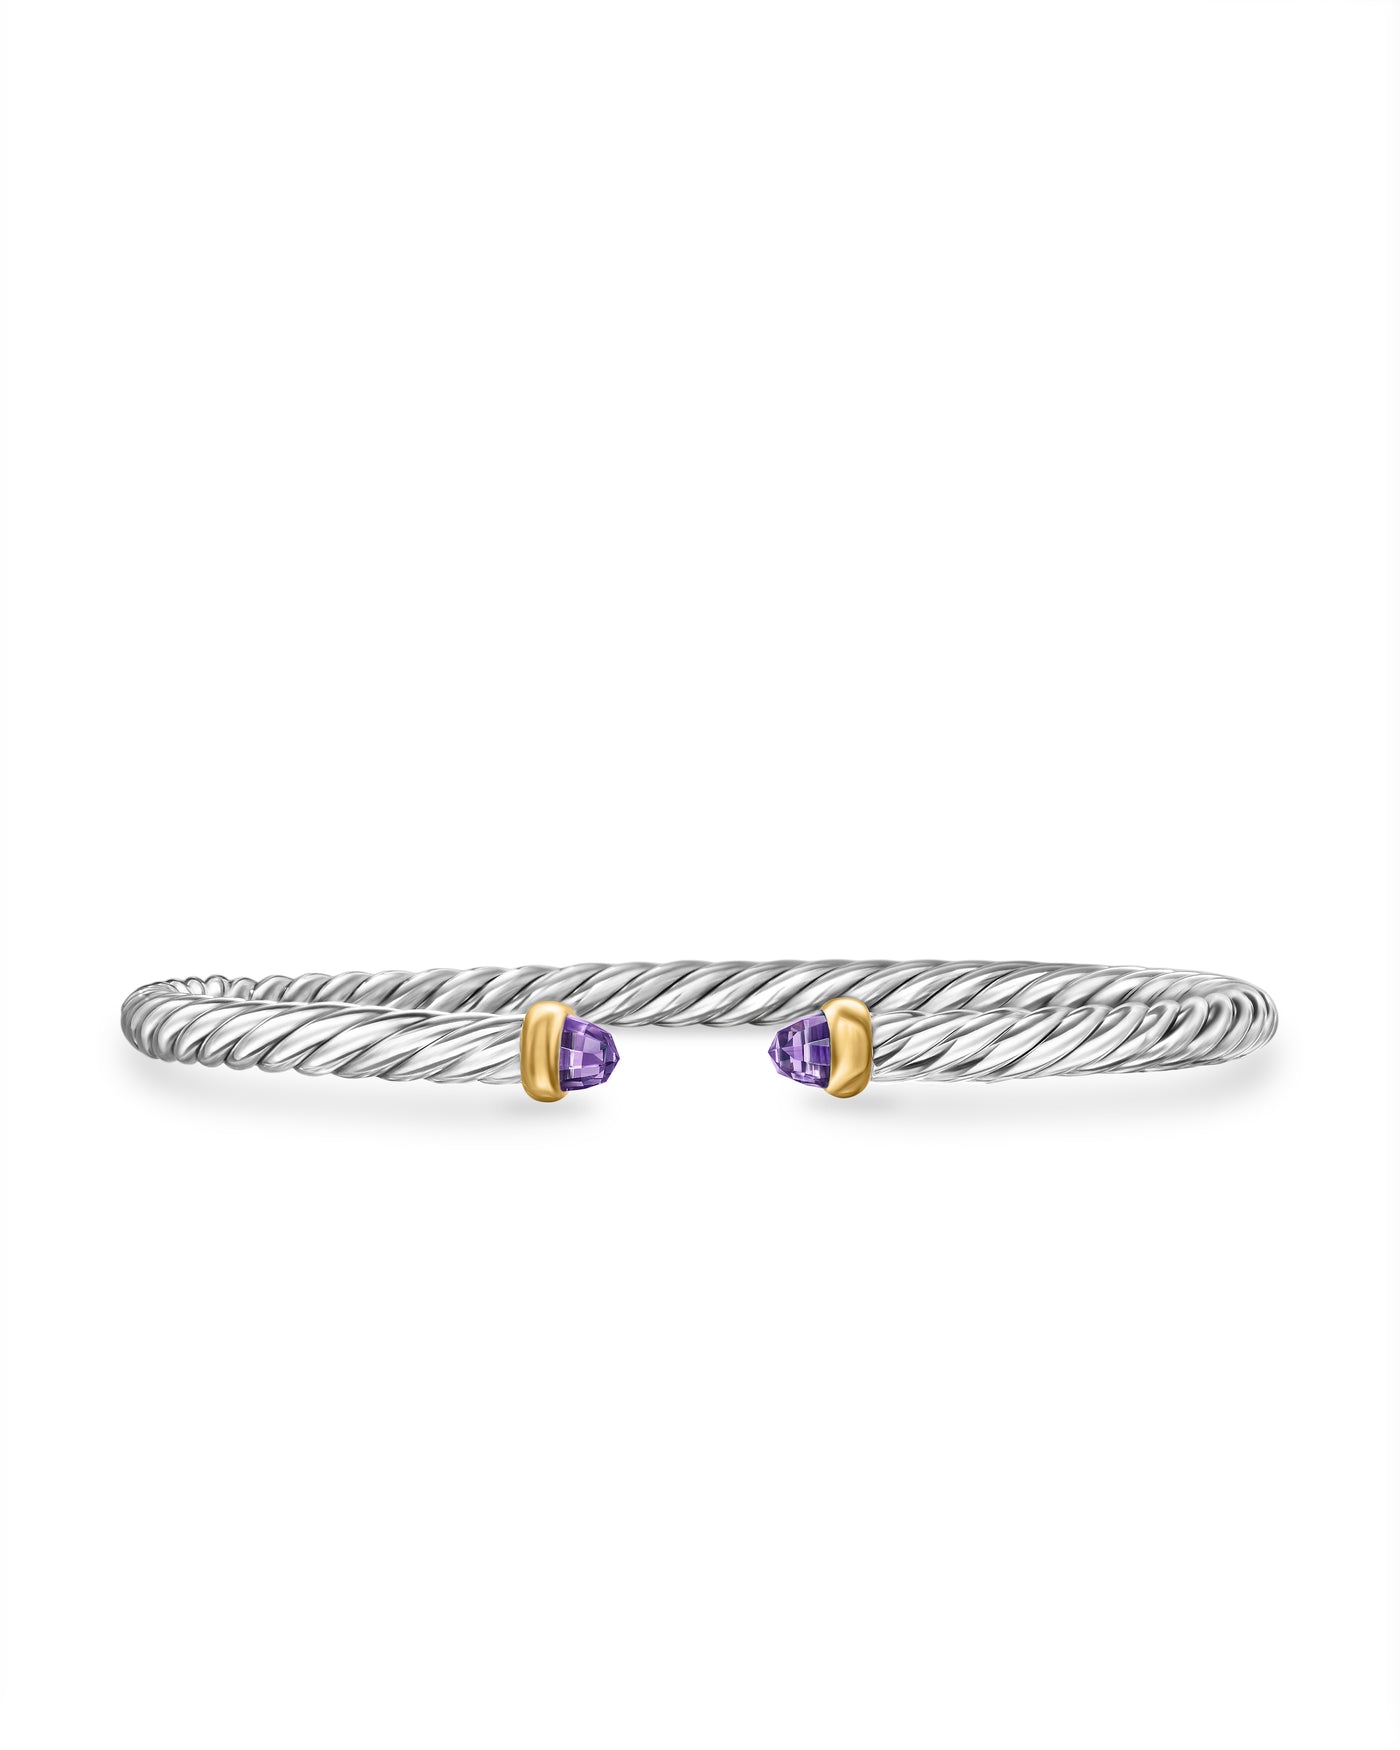 Modern Cable Bracelet in Sterling Silver with 14K Yellow Gold and Amethyst\, 4mm